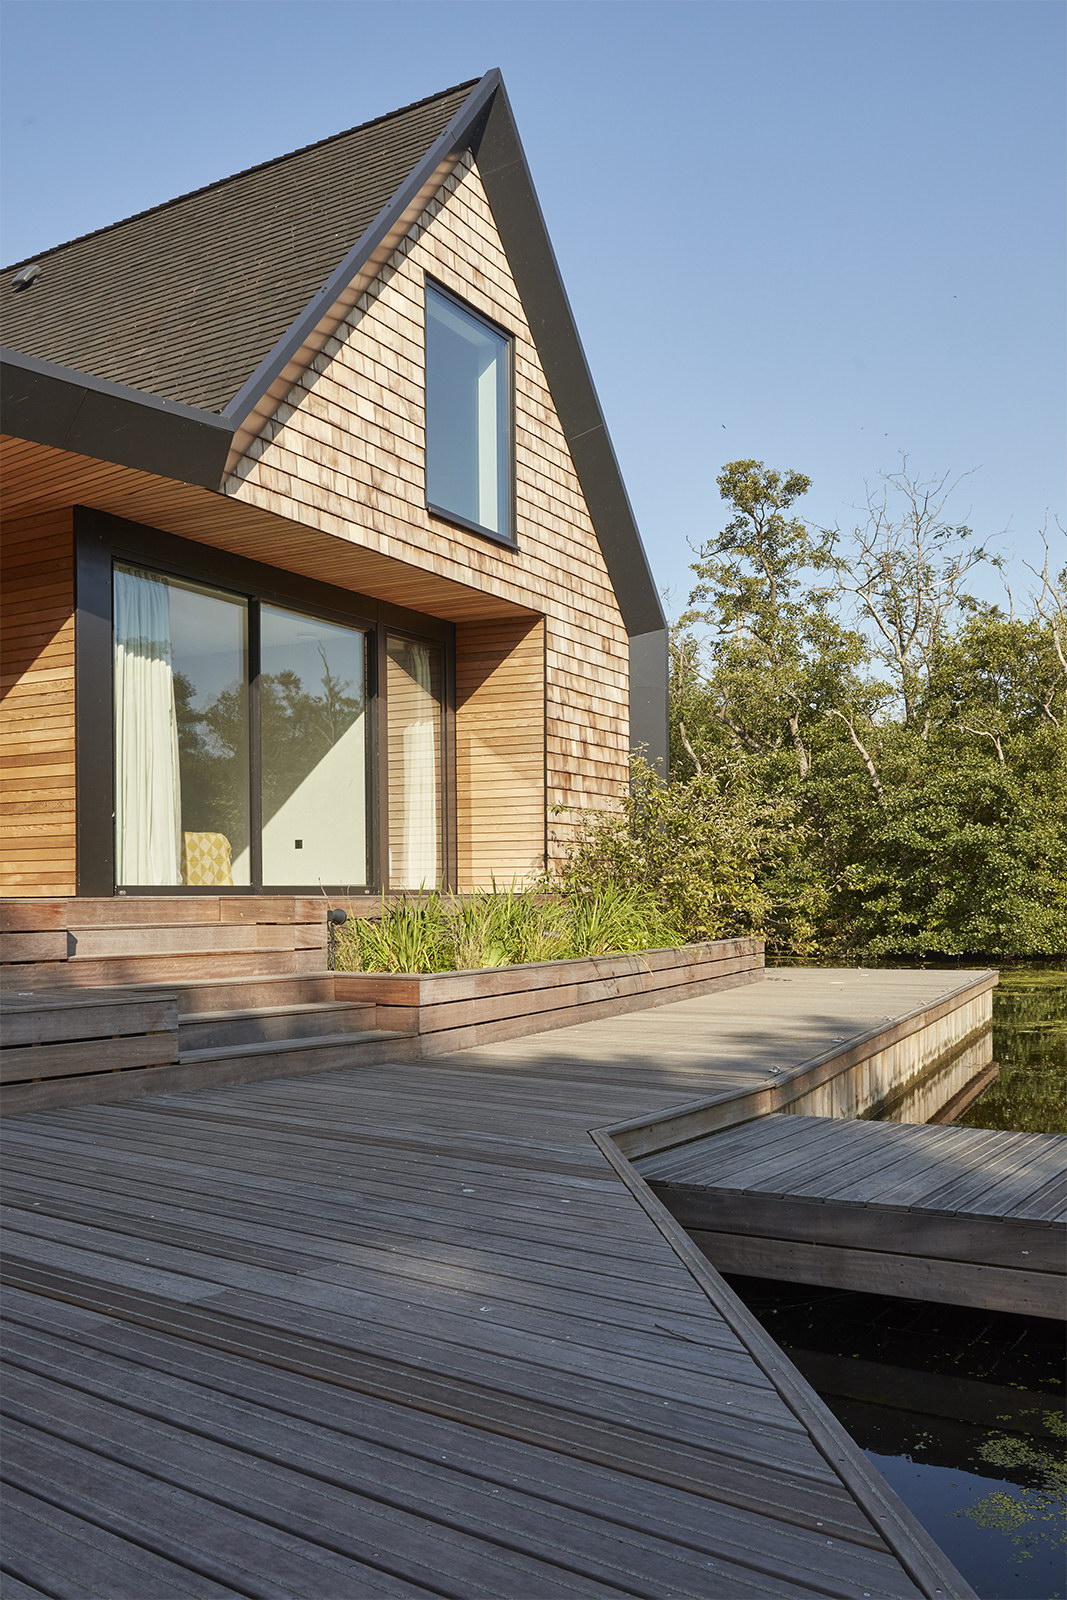 Backwater | Eco-House on the Norfolk Broads by Platform 5 Architects